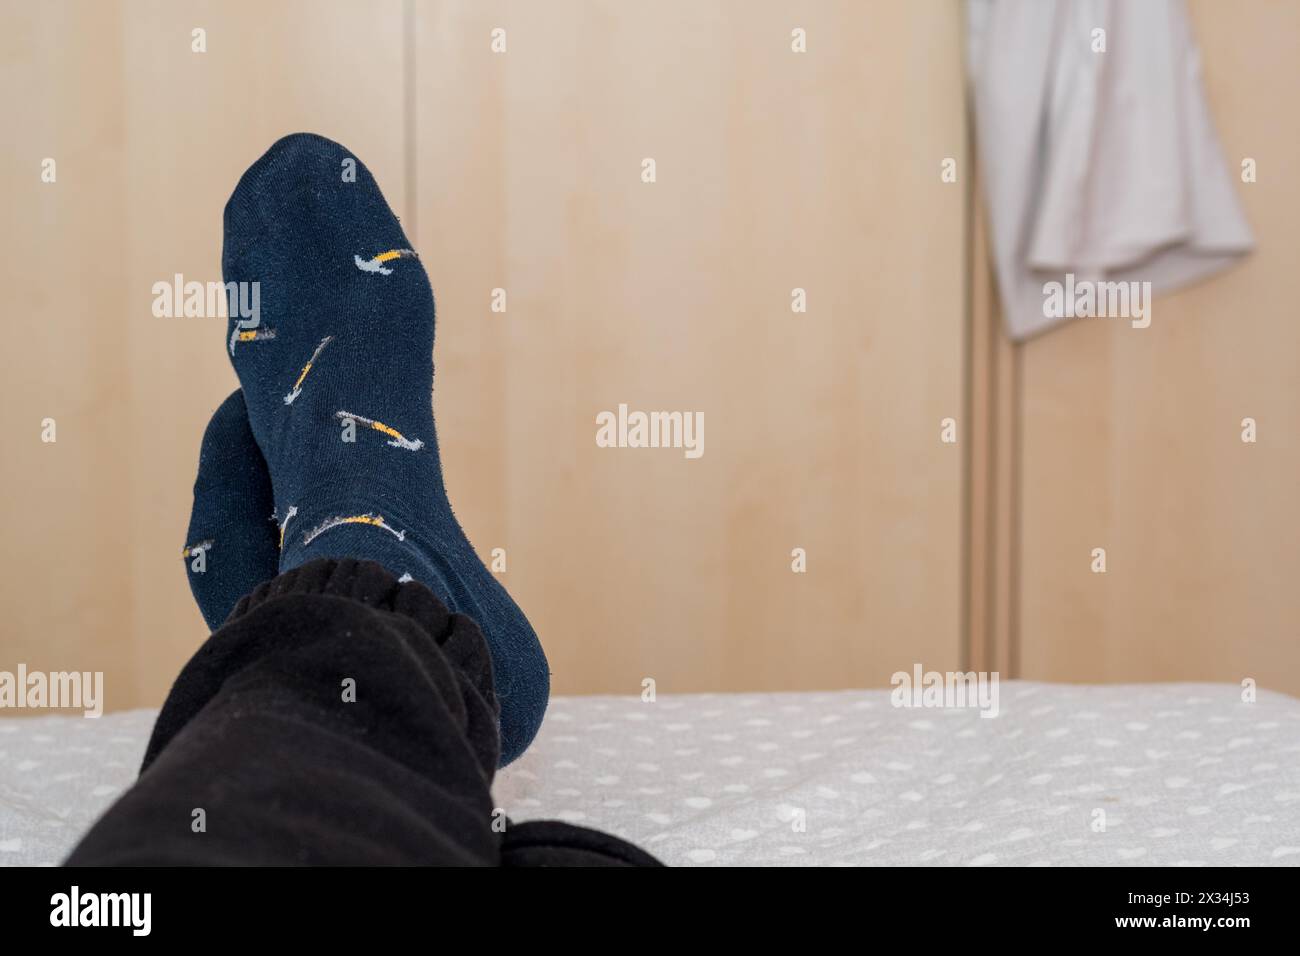 Man's feet crossed at the edge of the bed, relaxing in the room, nice blue socks. Stock Photo